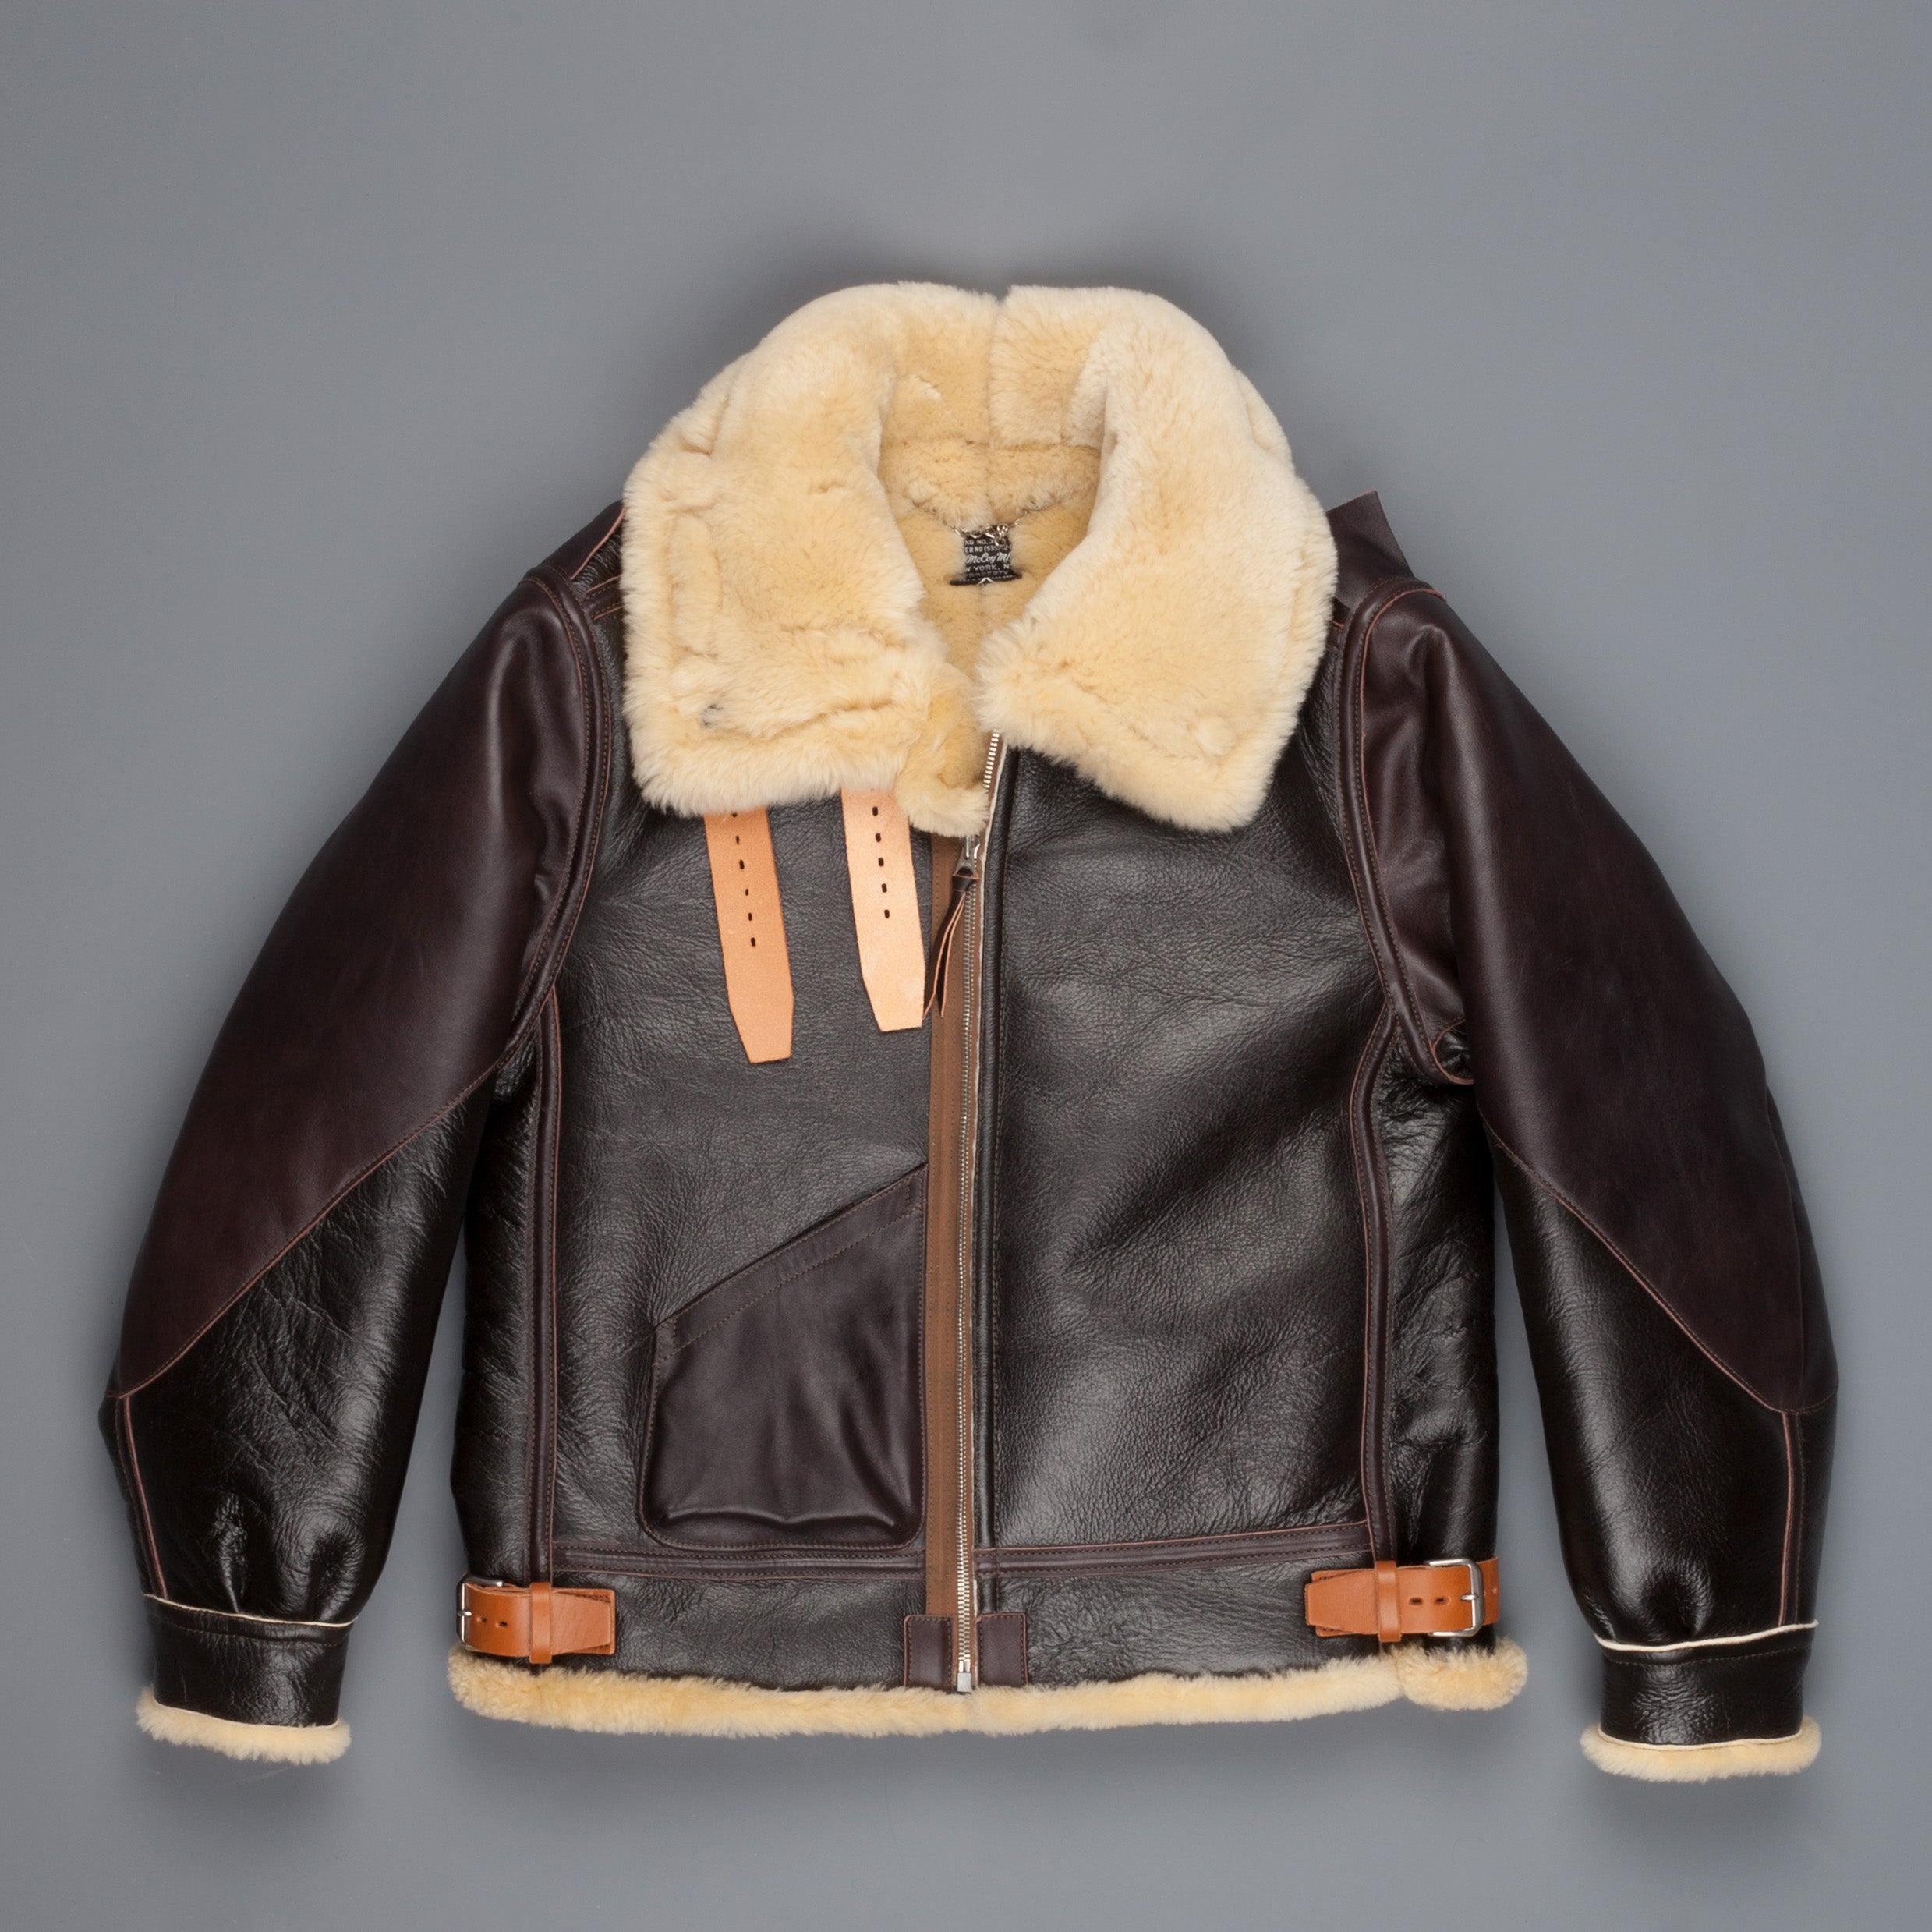 The Real McCoy's Type B-3 Jacket